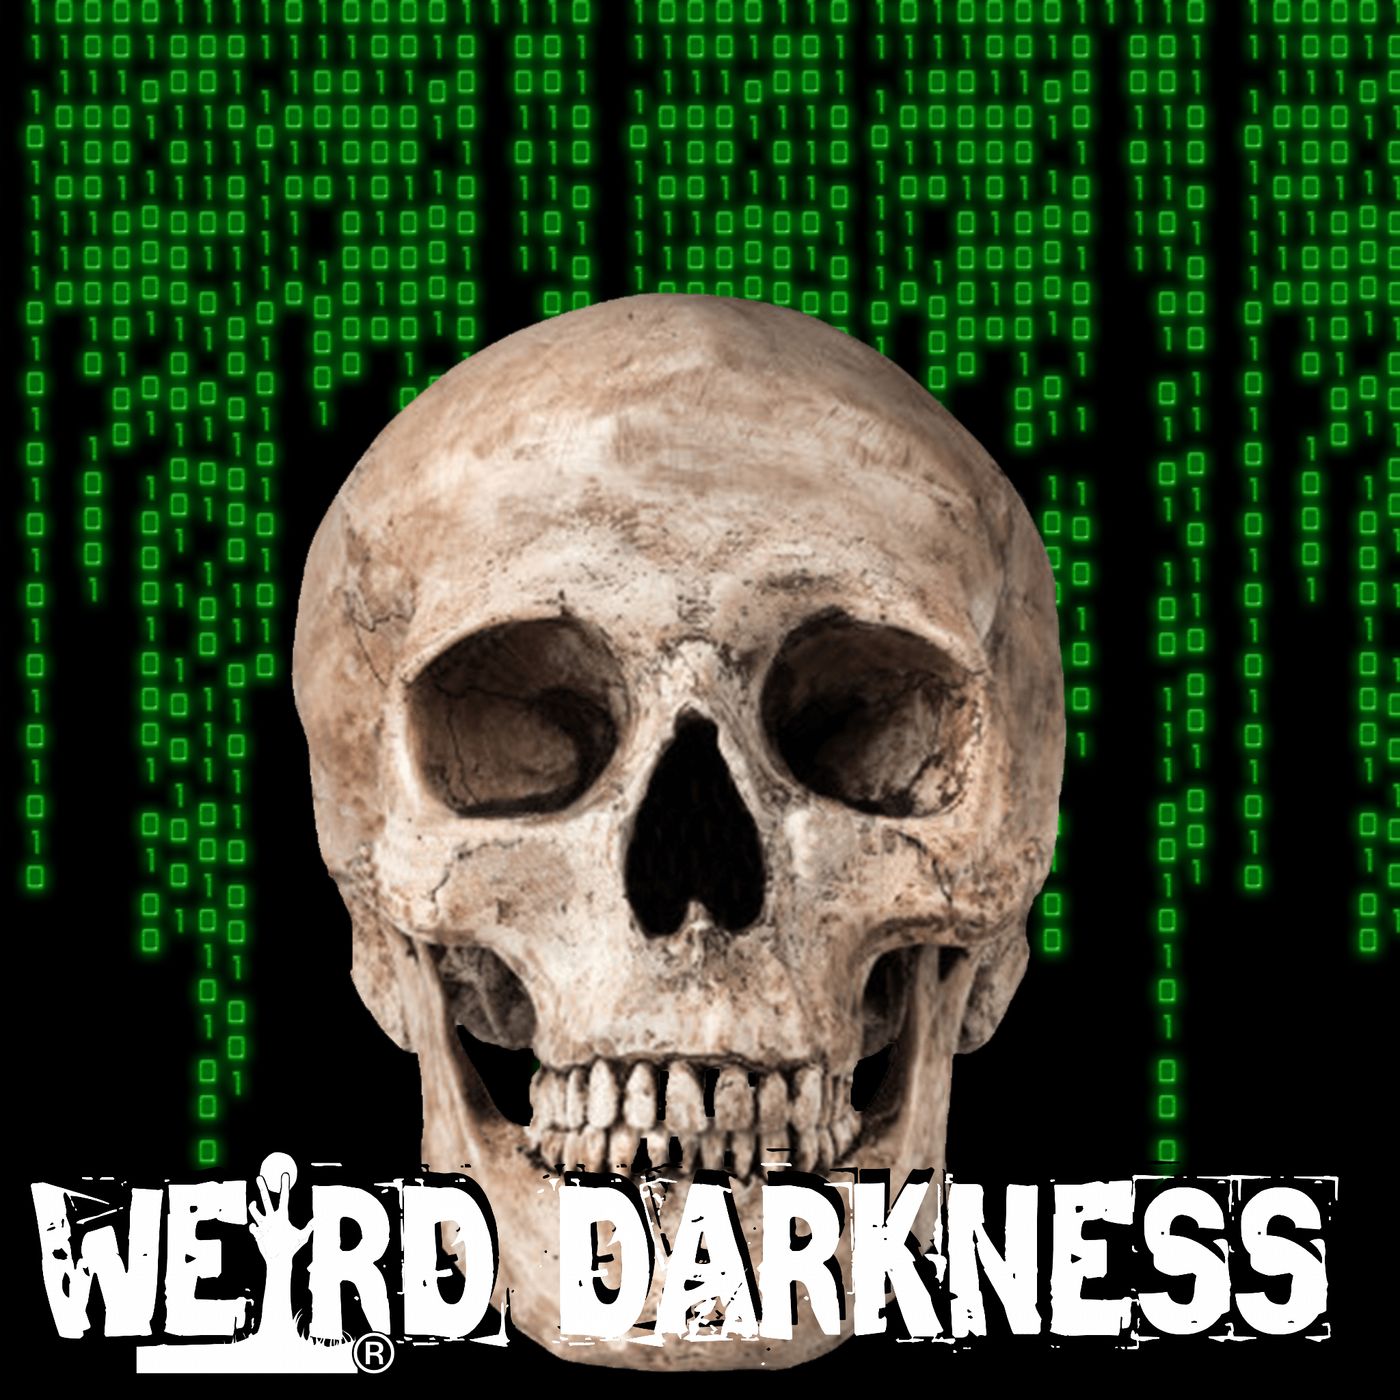 “EMAILS FROM THE DEAD” and More Terrifying True Stories! #WeirdDarkness #Darkives